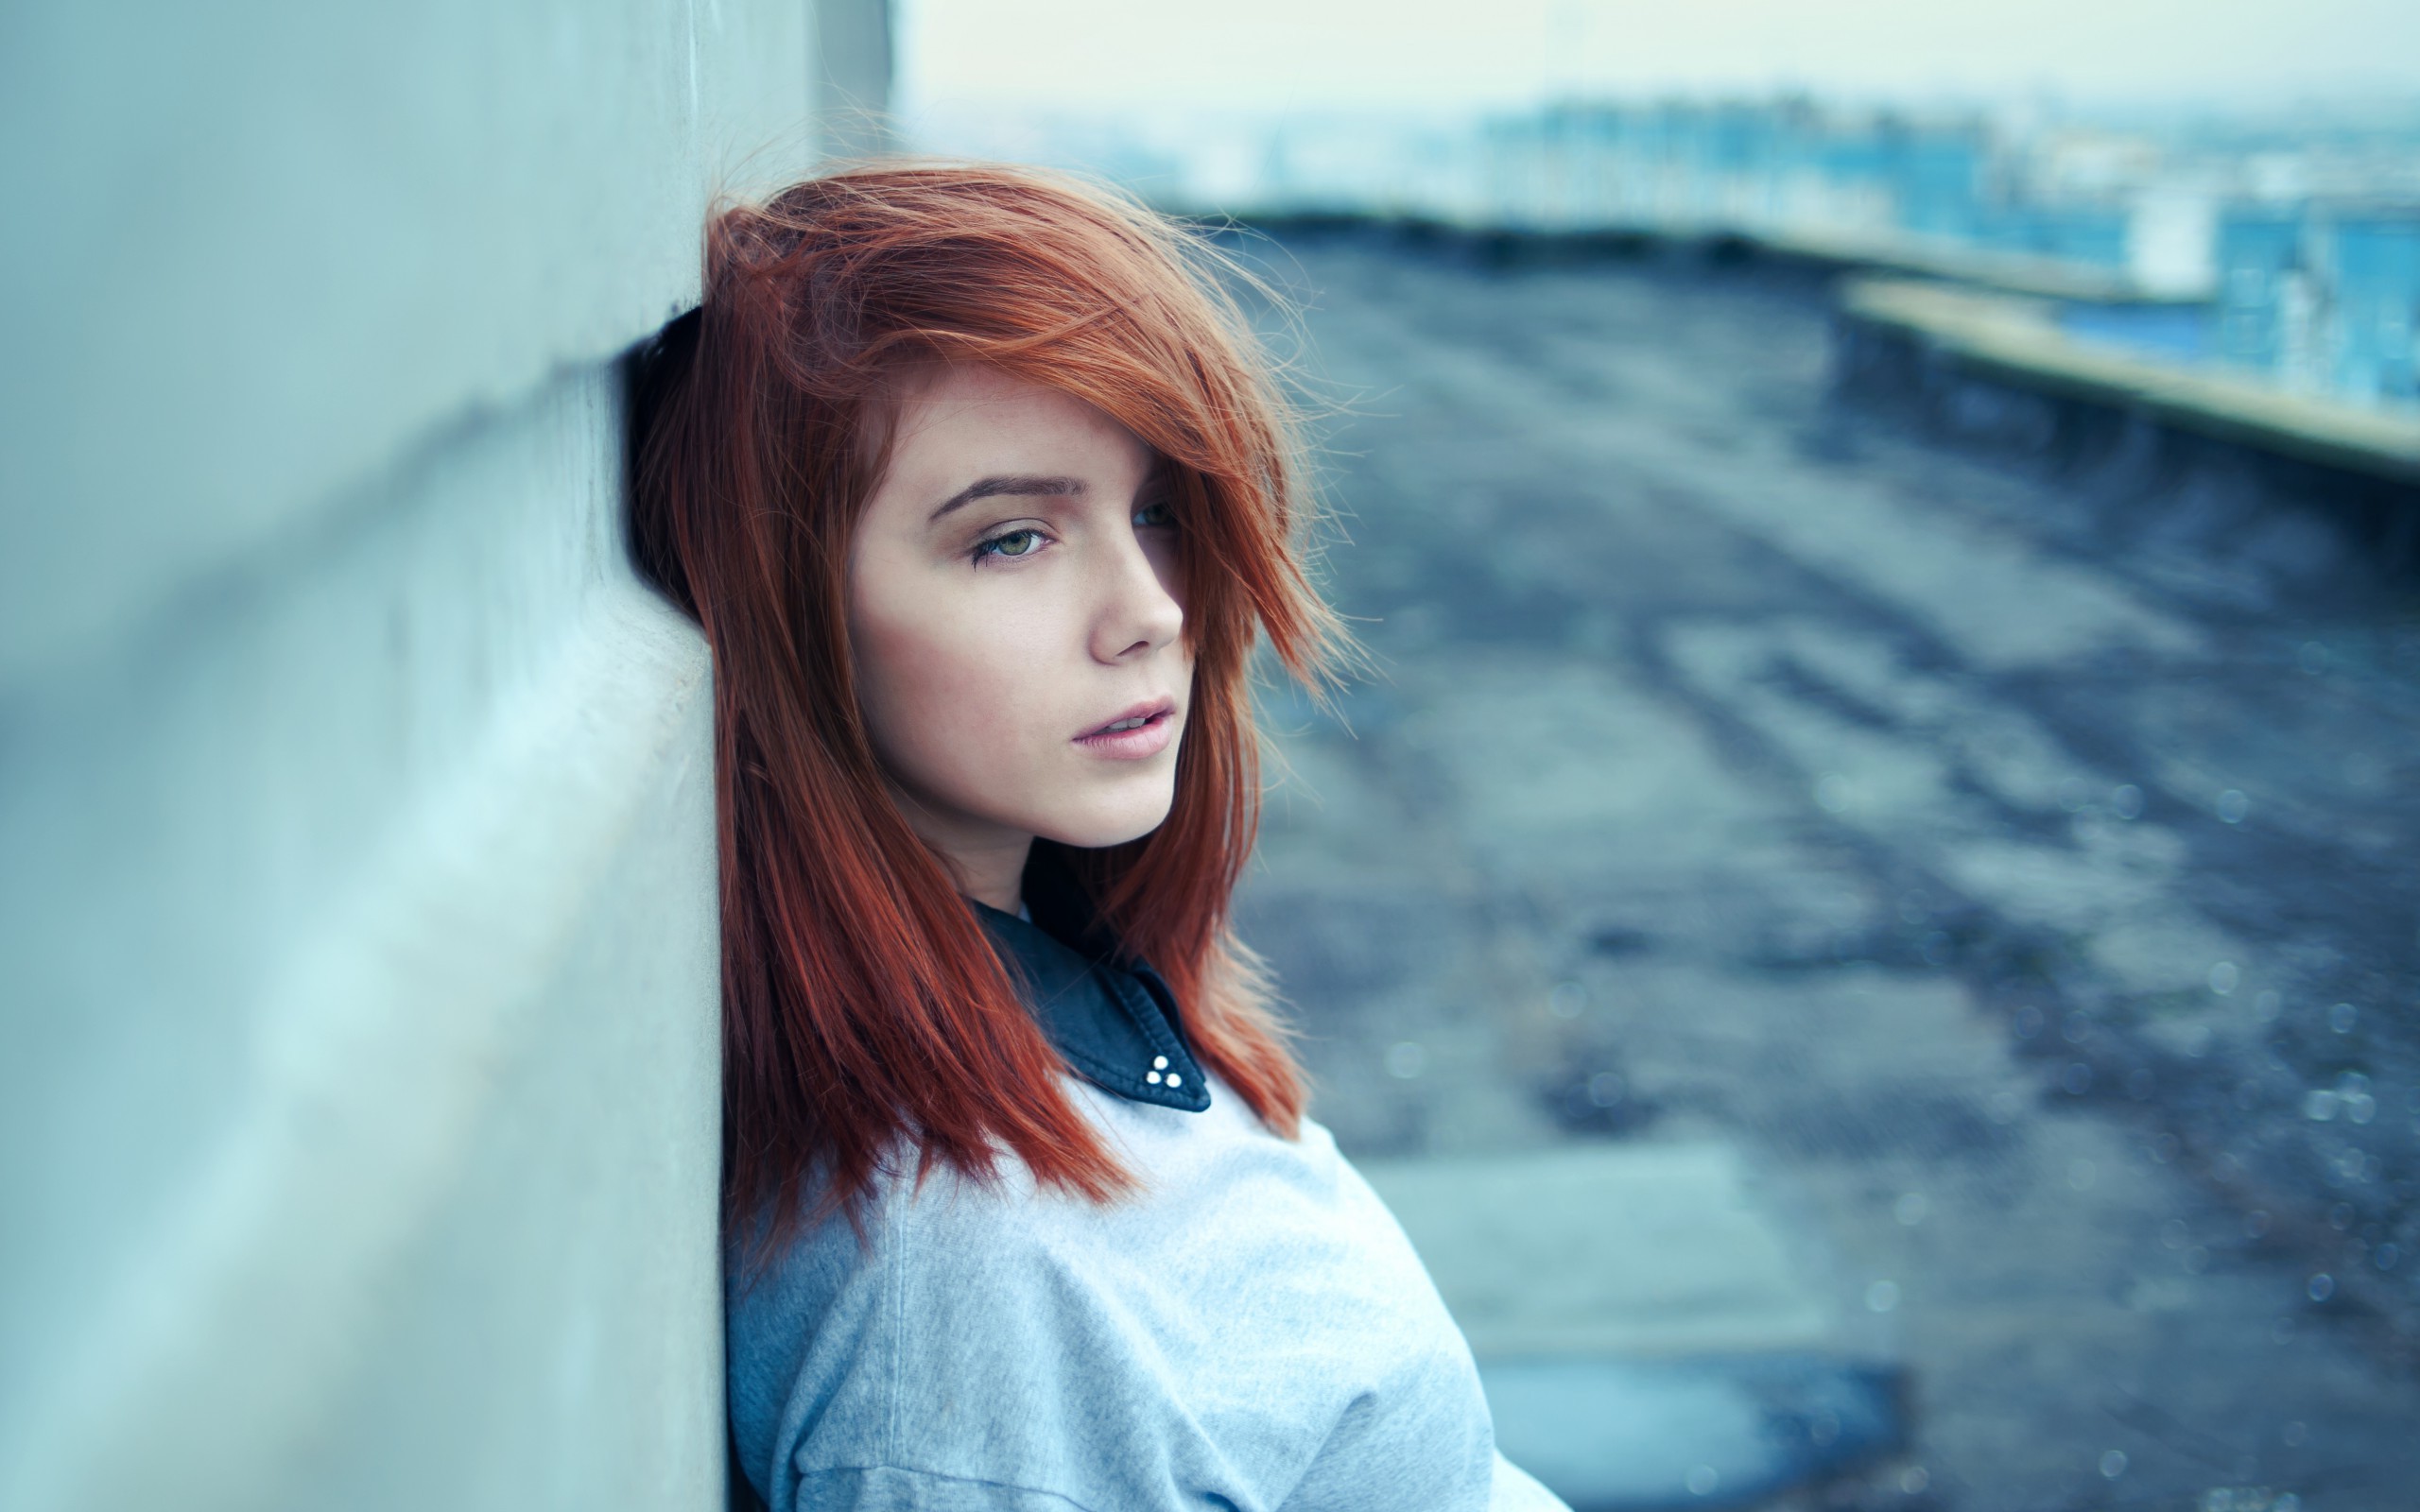 women, Redhead, Blue Eyes, Looking Away, Face, Hair In Face, Against Wall Wallpaper